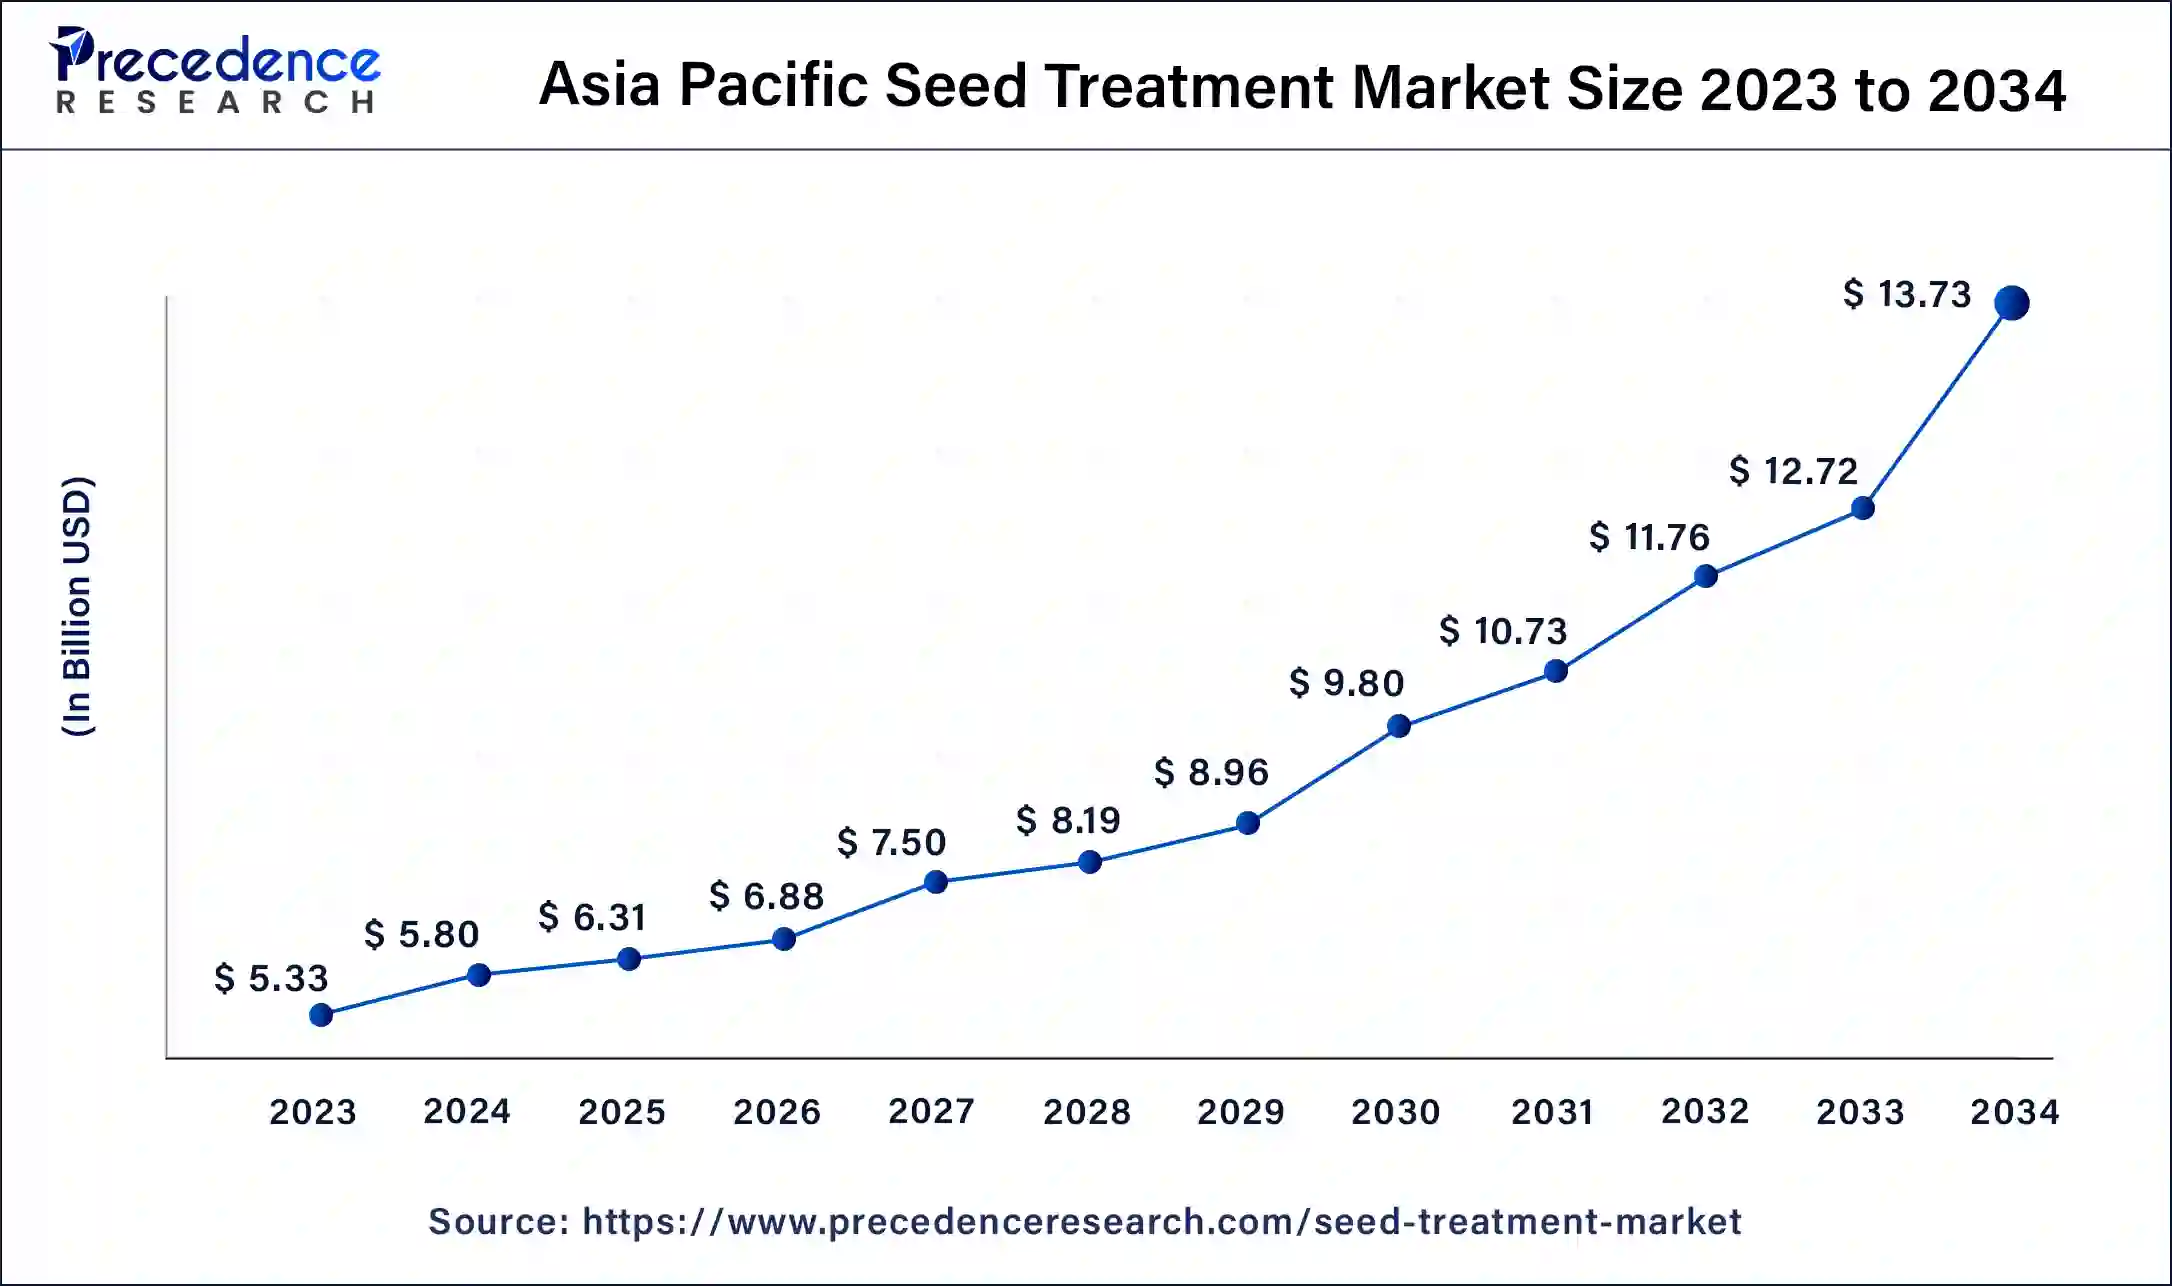 Asia Pacific Seed Treatment Market Size 2024 To 2034